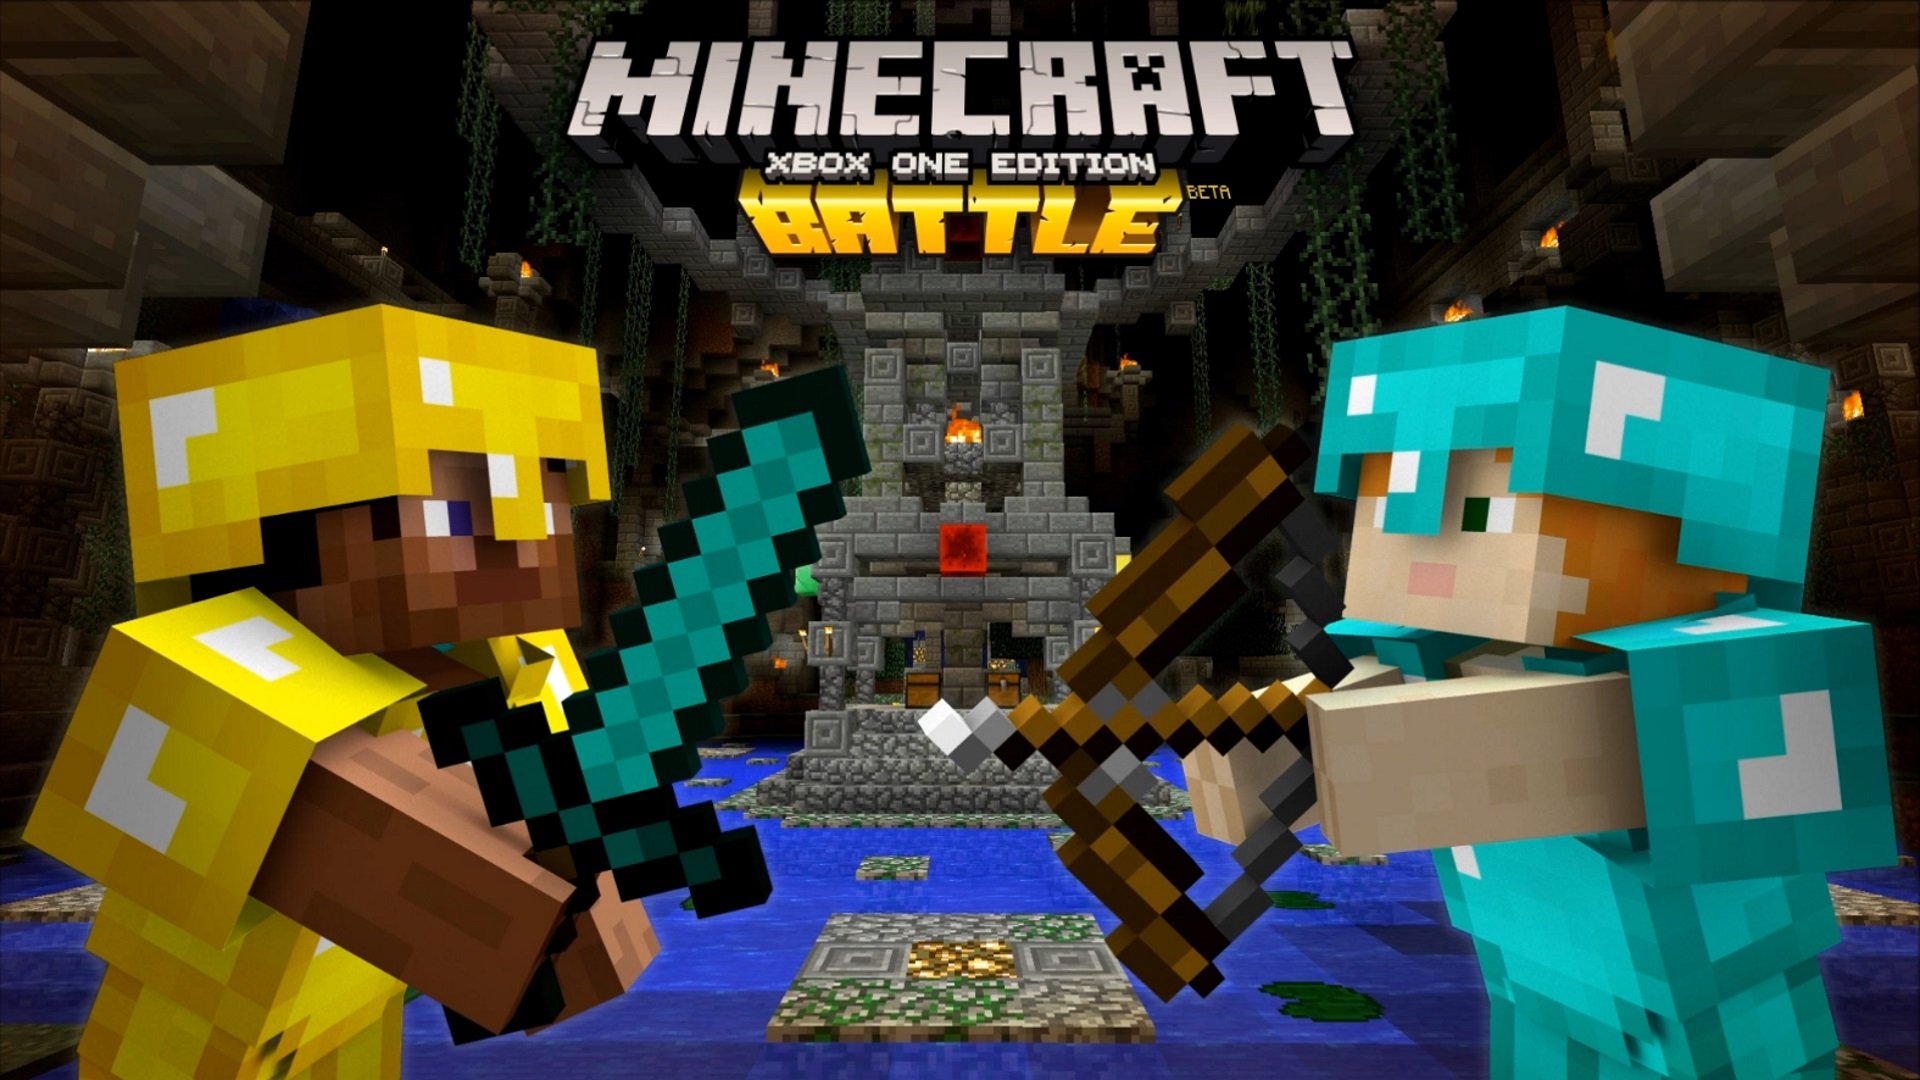 Minecraft Battle Multiplayer Arena Mode Hands On Preview Attack Of The Fanboy